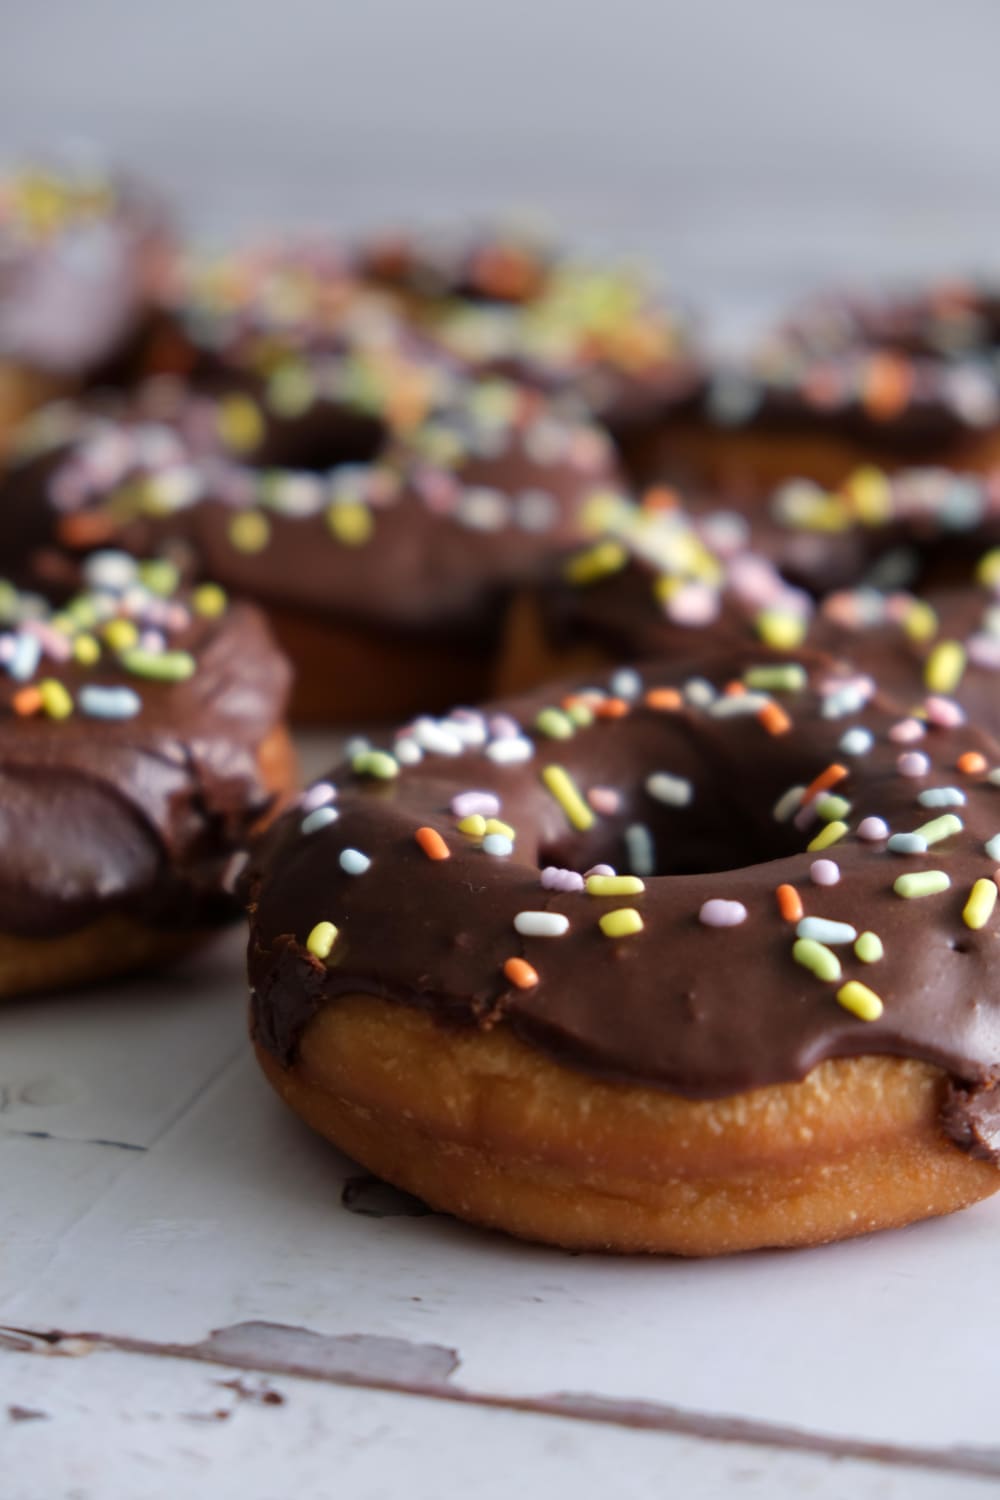 For National Donut Day tomorrow, here's my vegan donut recipe (can be made glazed or chocolate frosted)